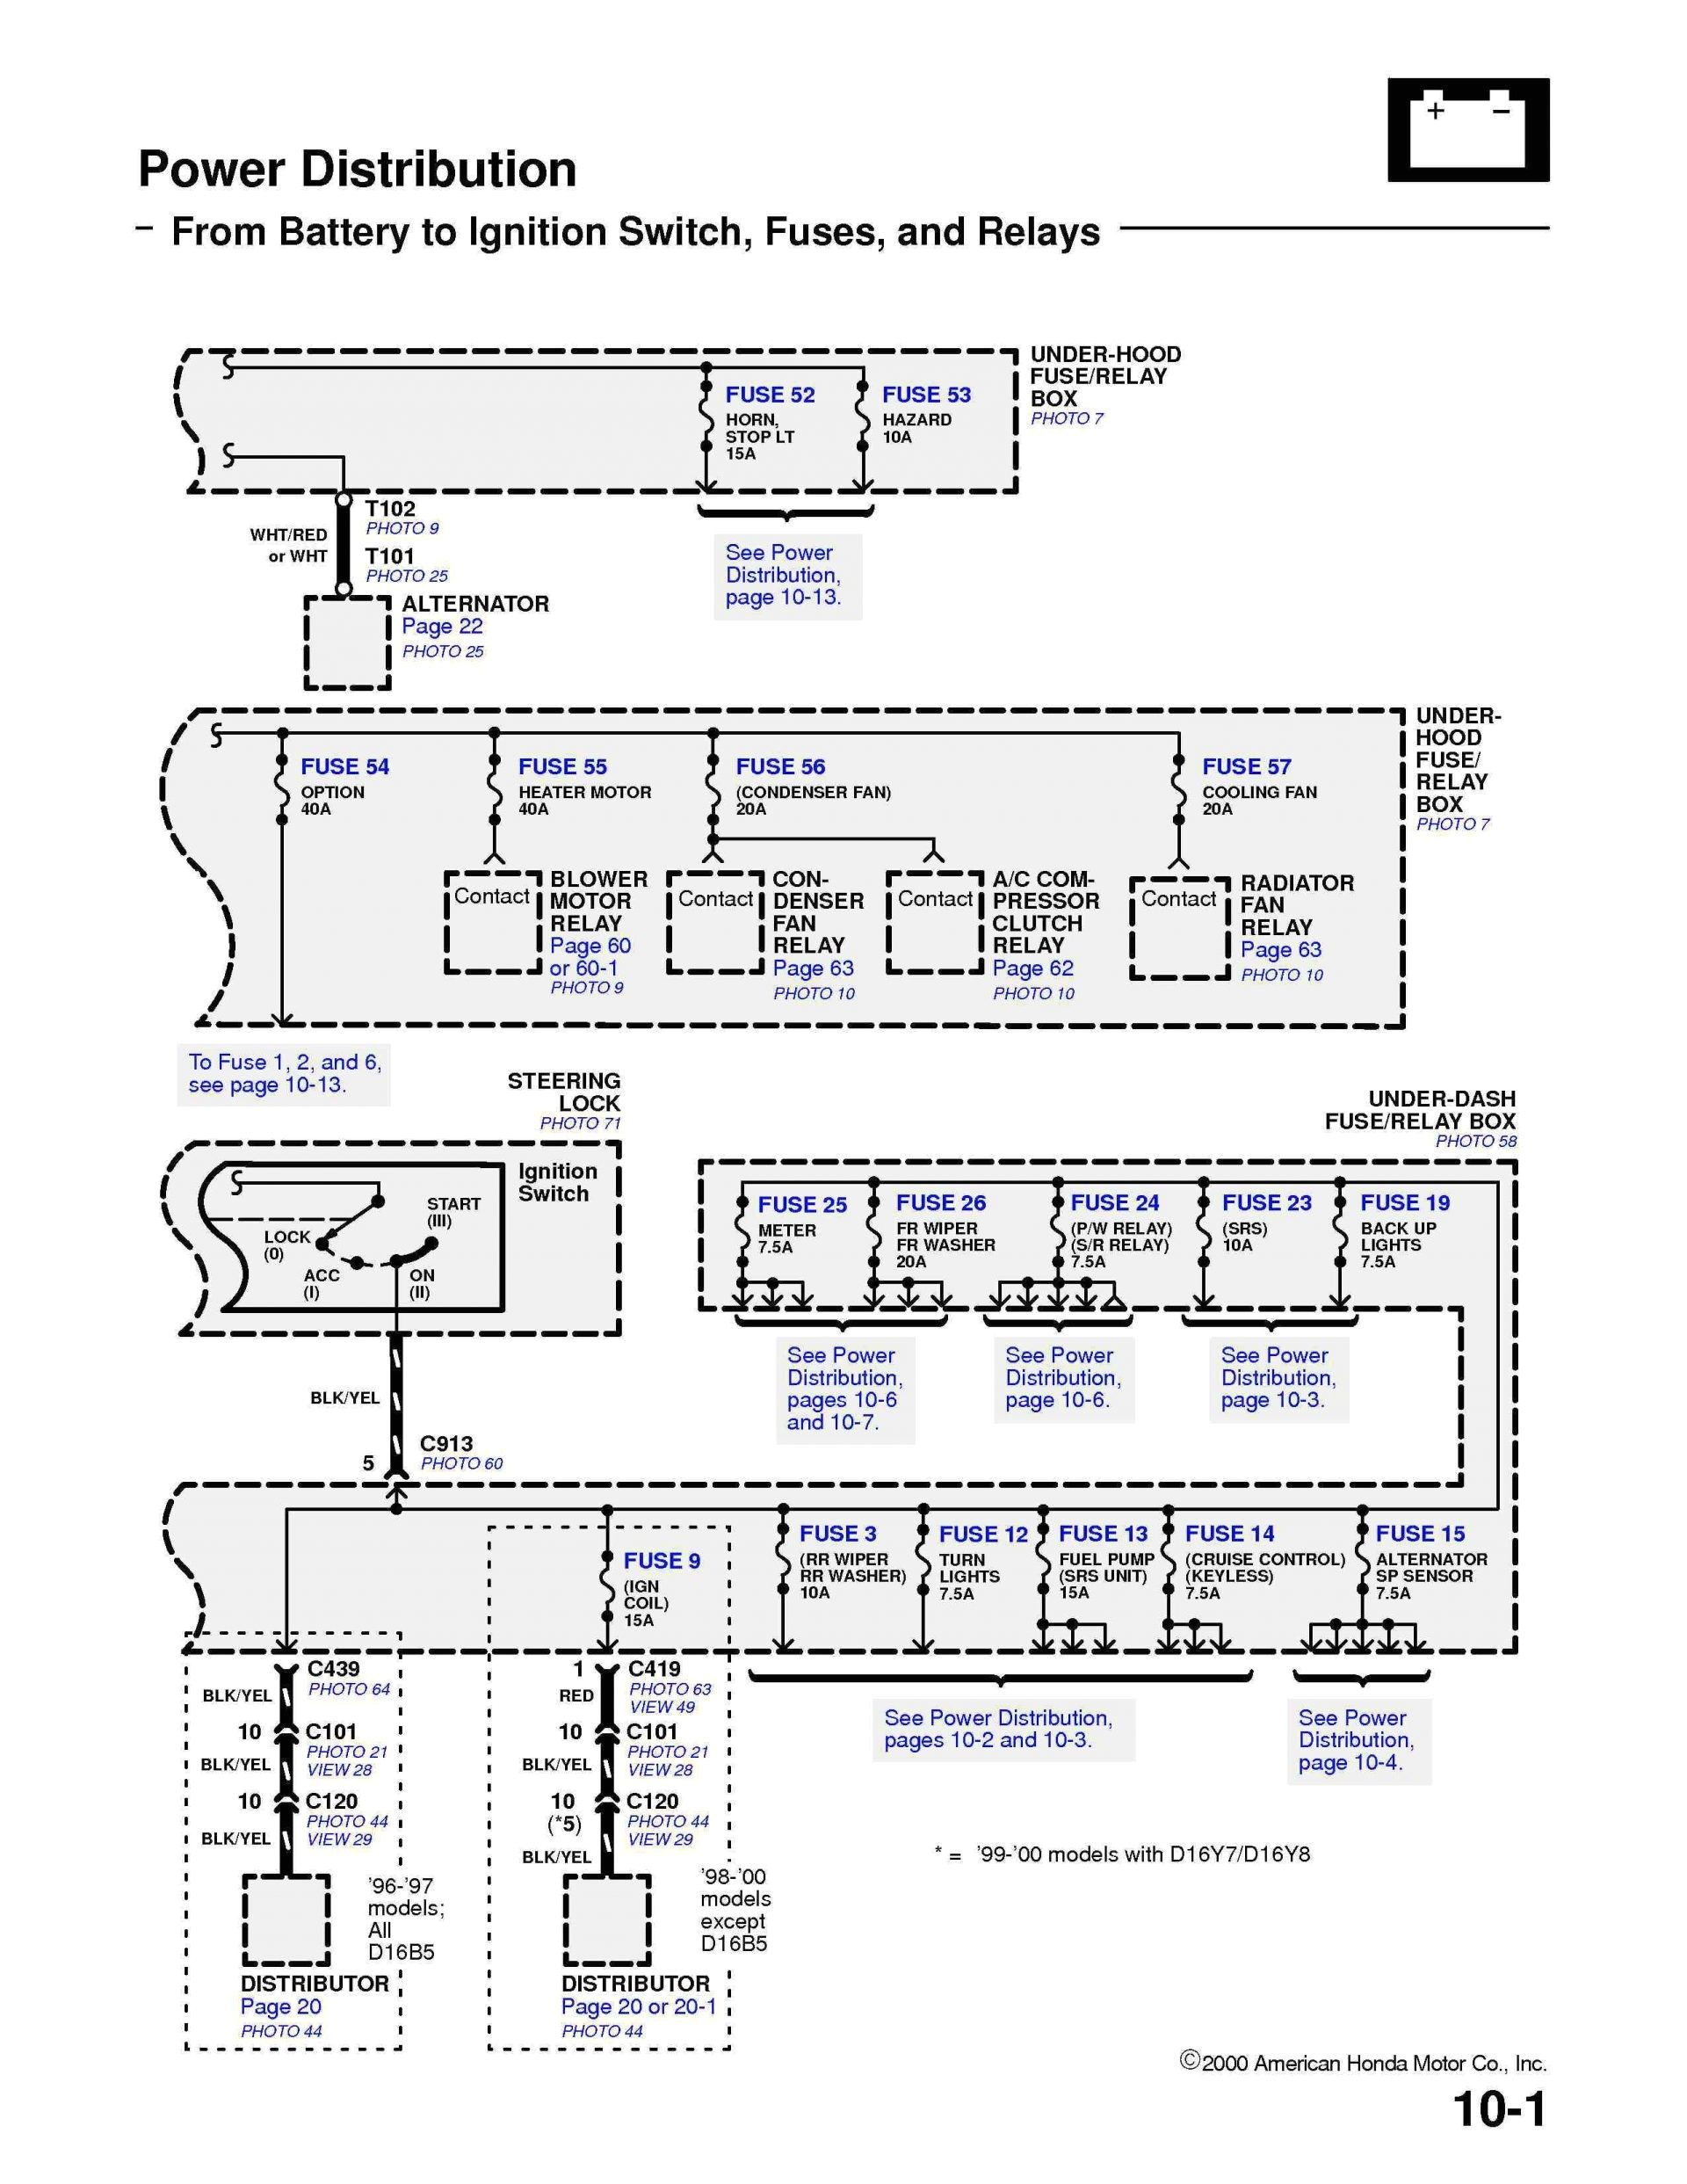 clarion car stereo wiring diagram u2013 clarion car stereo